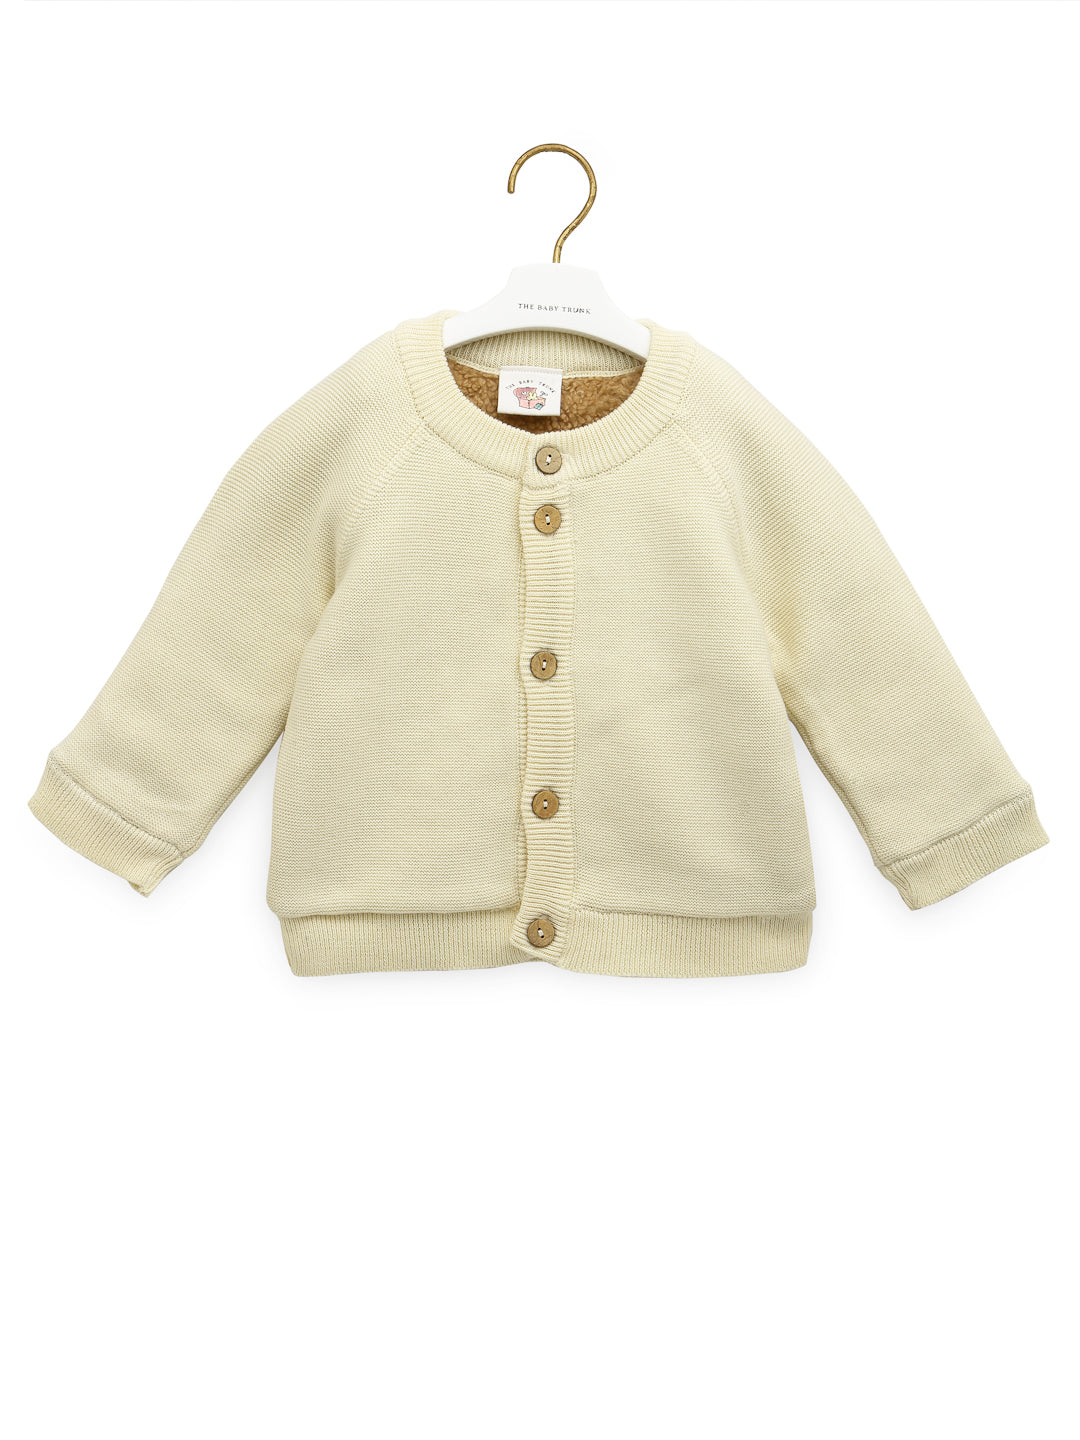 Cardigan with Contrast Sherpa Lining - Center Front open For Baby